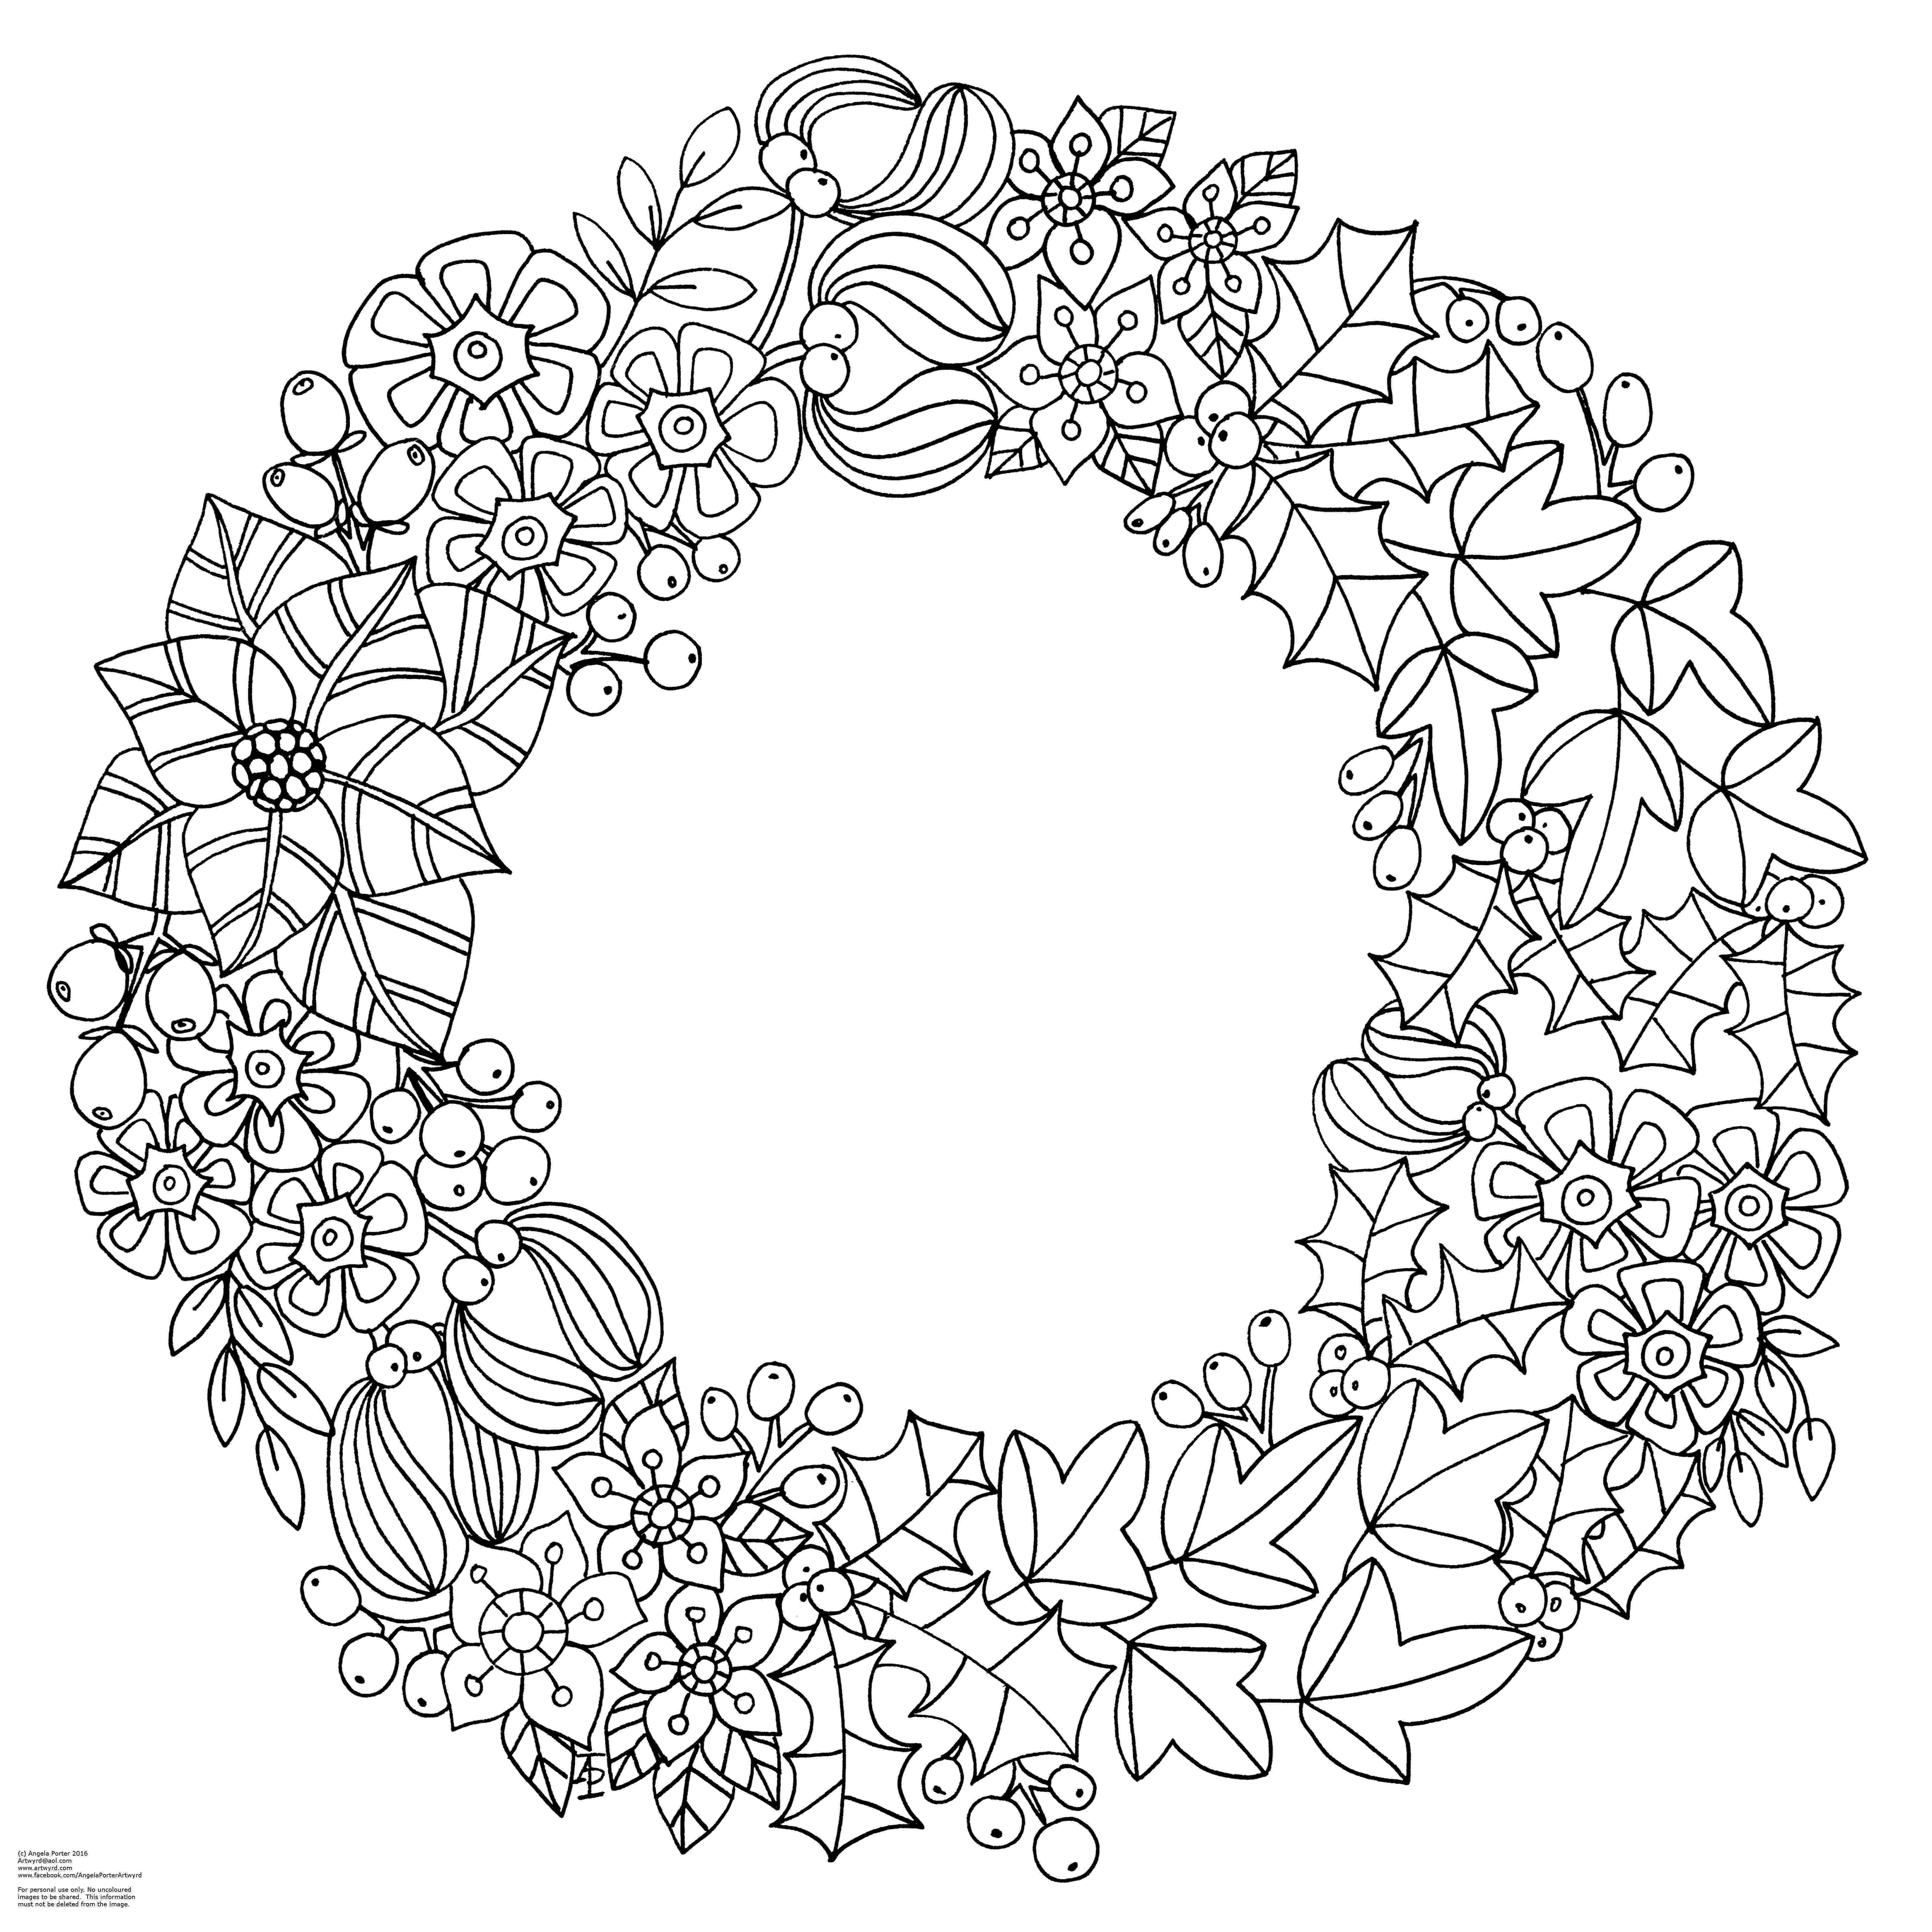 wreath coloring pages winterchristmas wreath colouring pages angela porter wreath coloring pages 